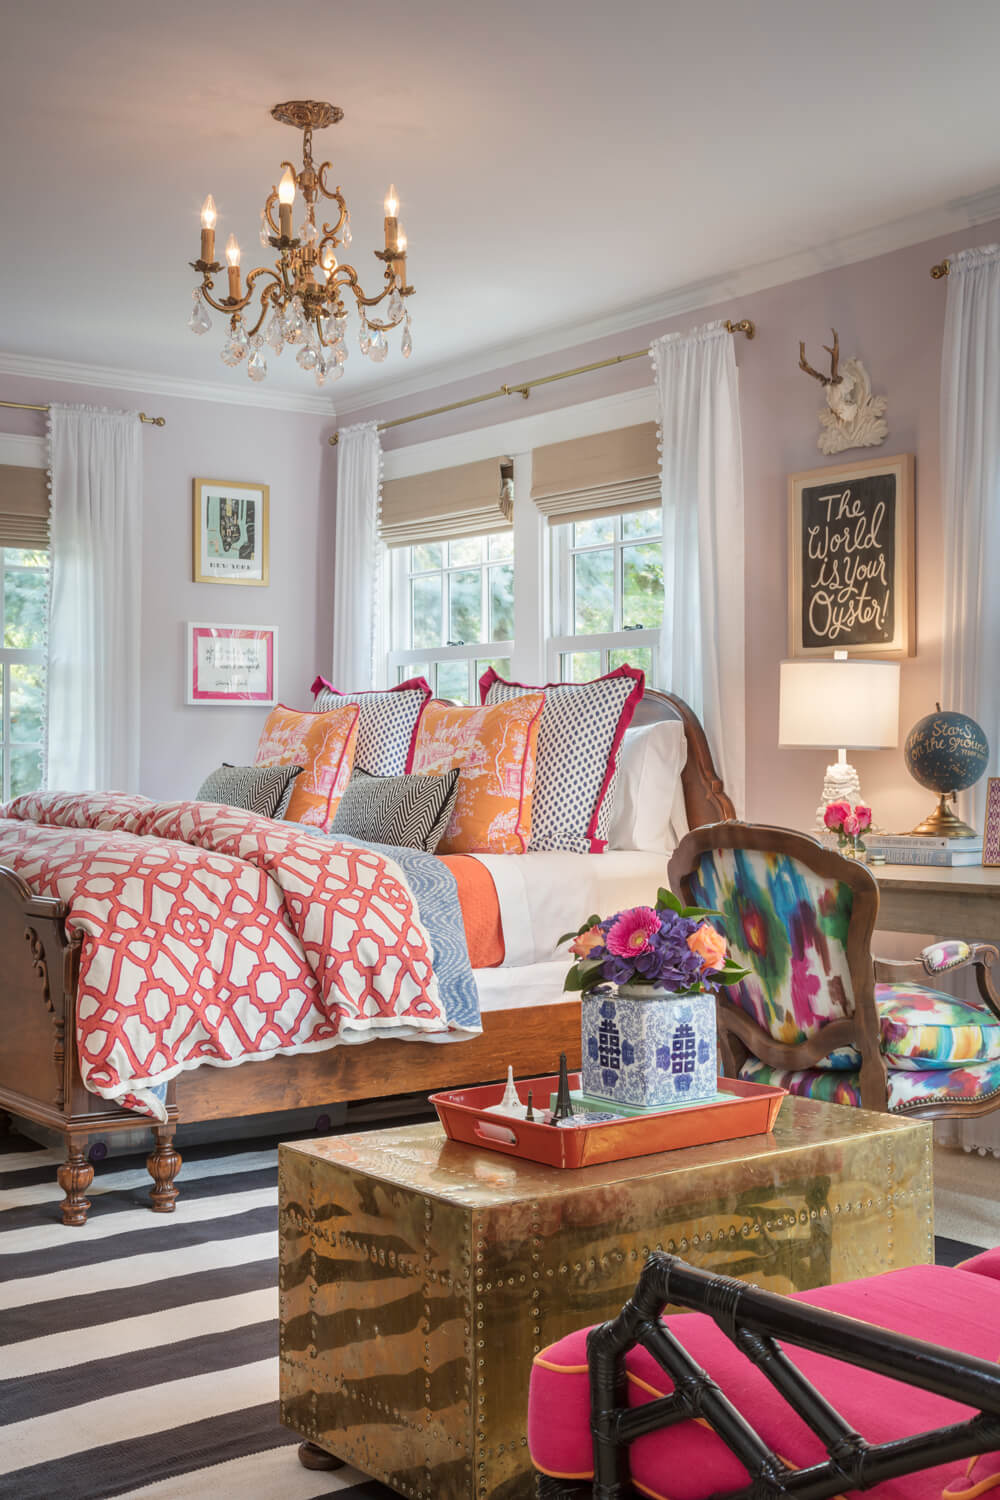 In The Love Of Home Files #21, a colorful bedroom